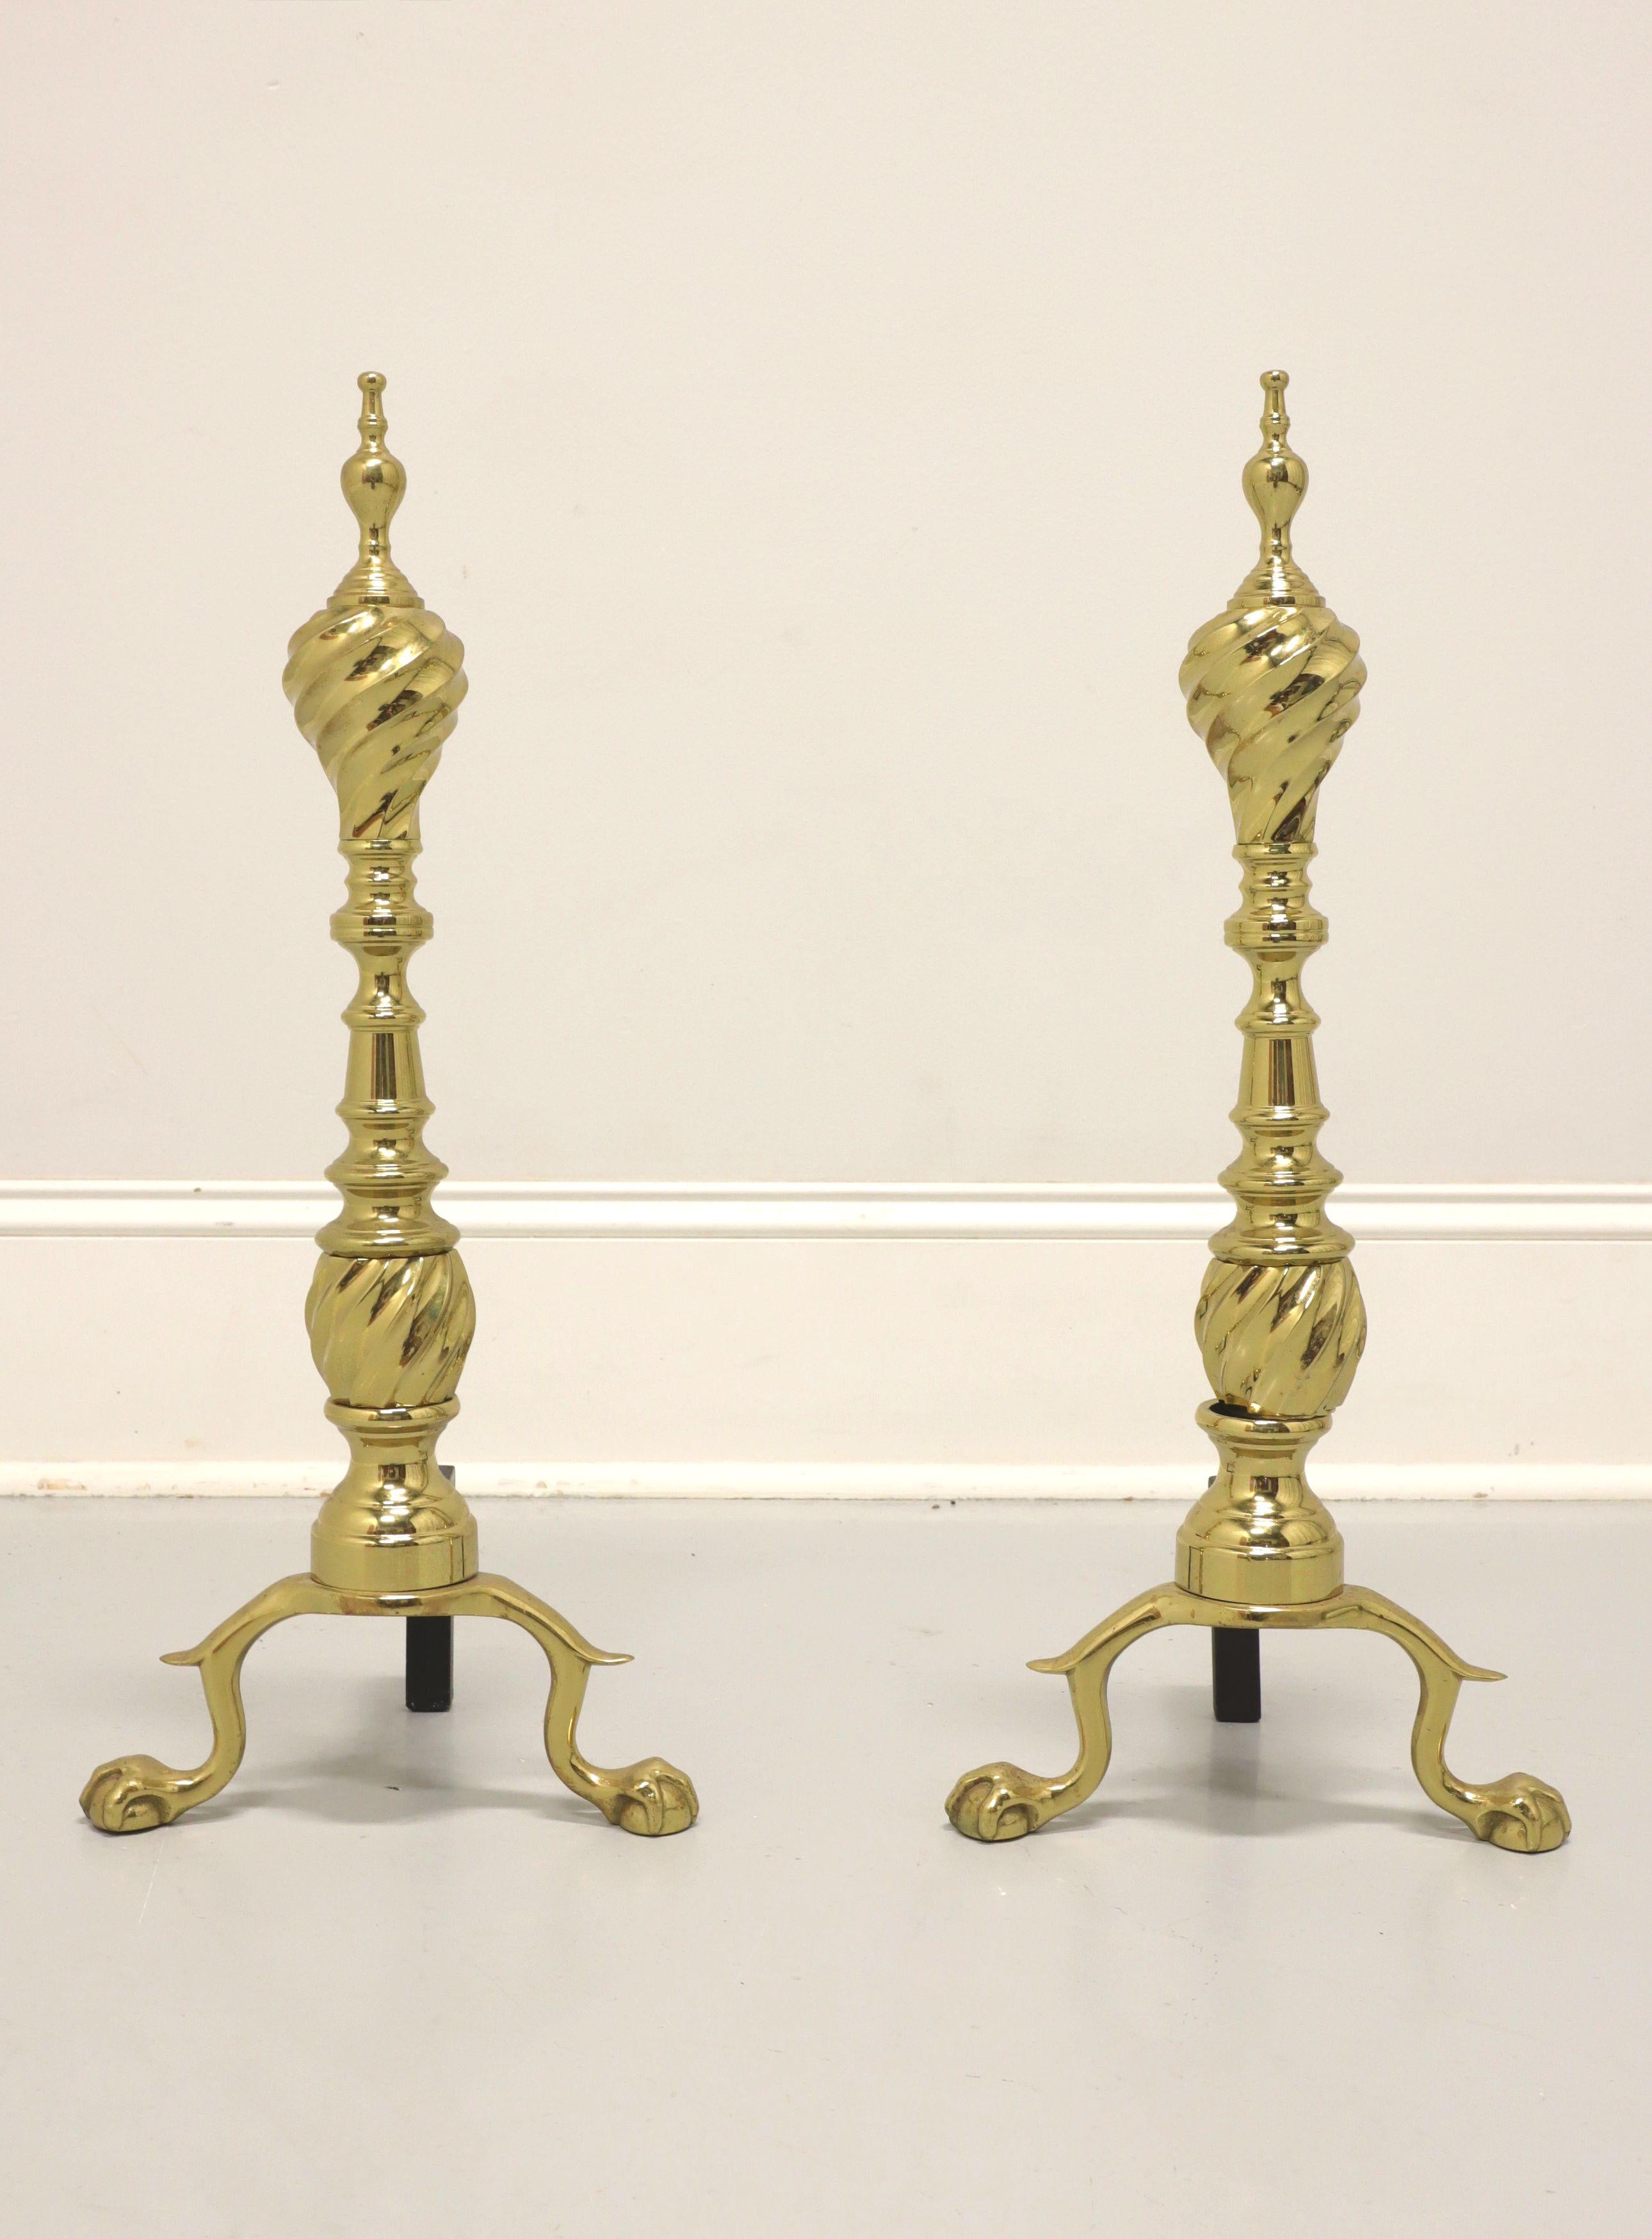 A pair of Traditional style fireplace andirons by Virginia Metalcrafters. A historic reproduction of andirons found in Middleton House in Charleston, South Carolina, USA and approved by the Historic Charleston Foundation. Solid polished brass